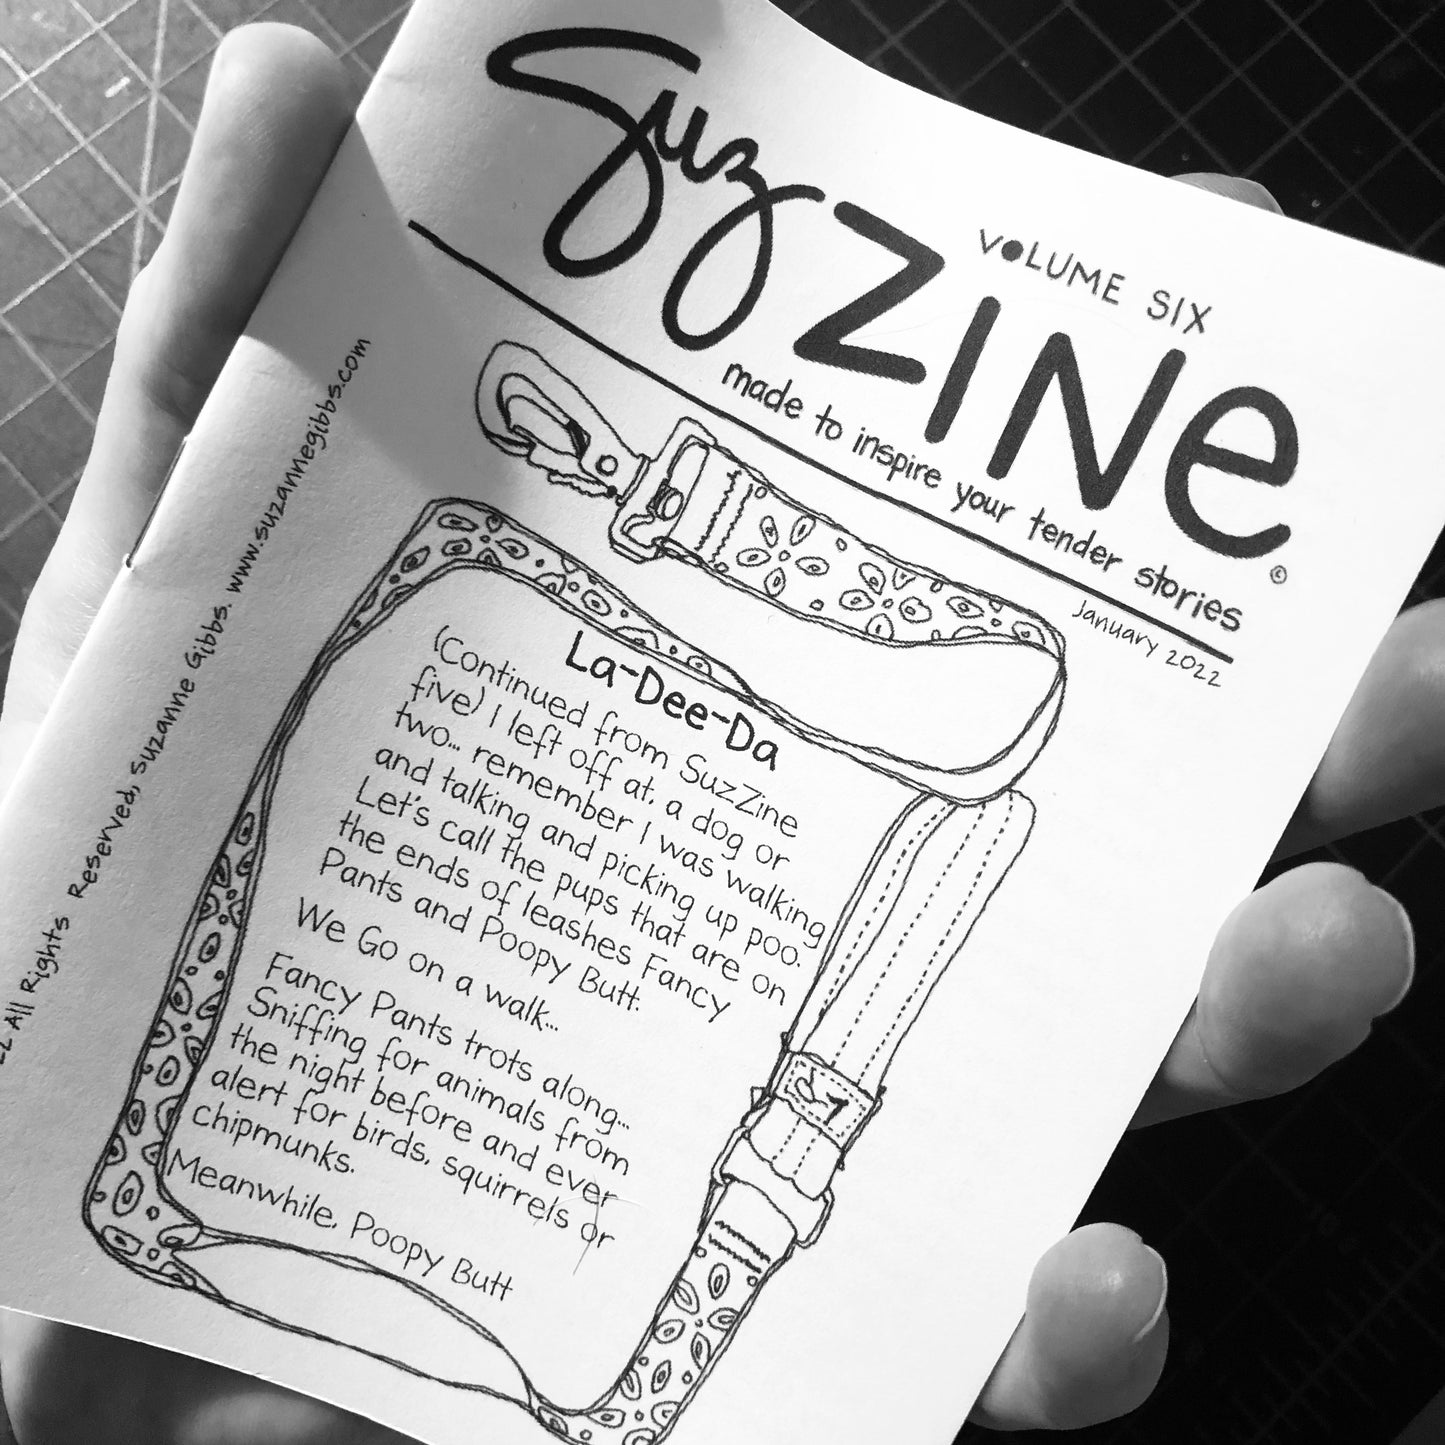 SuzZine—a monthly publication and subscription—made to inspire your tender stories.